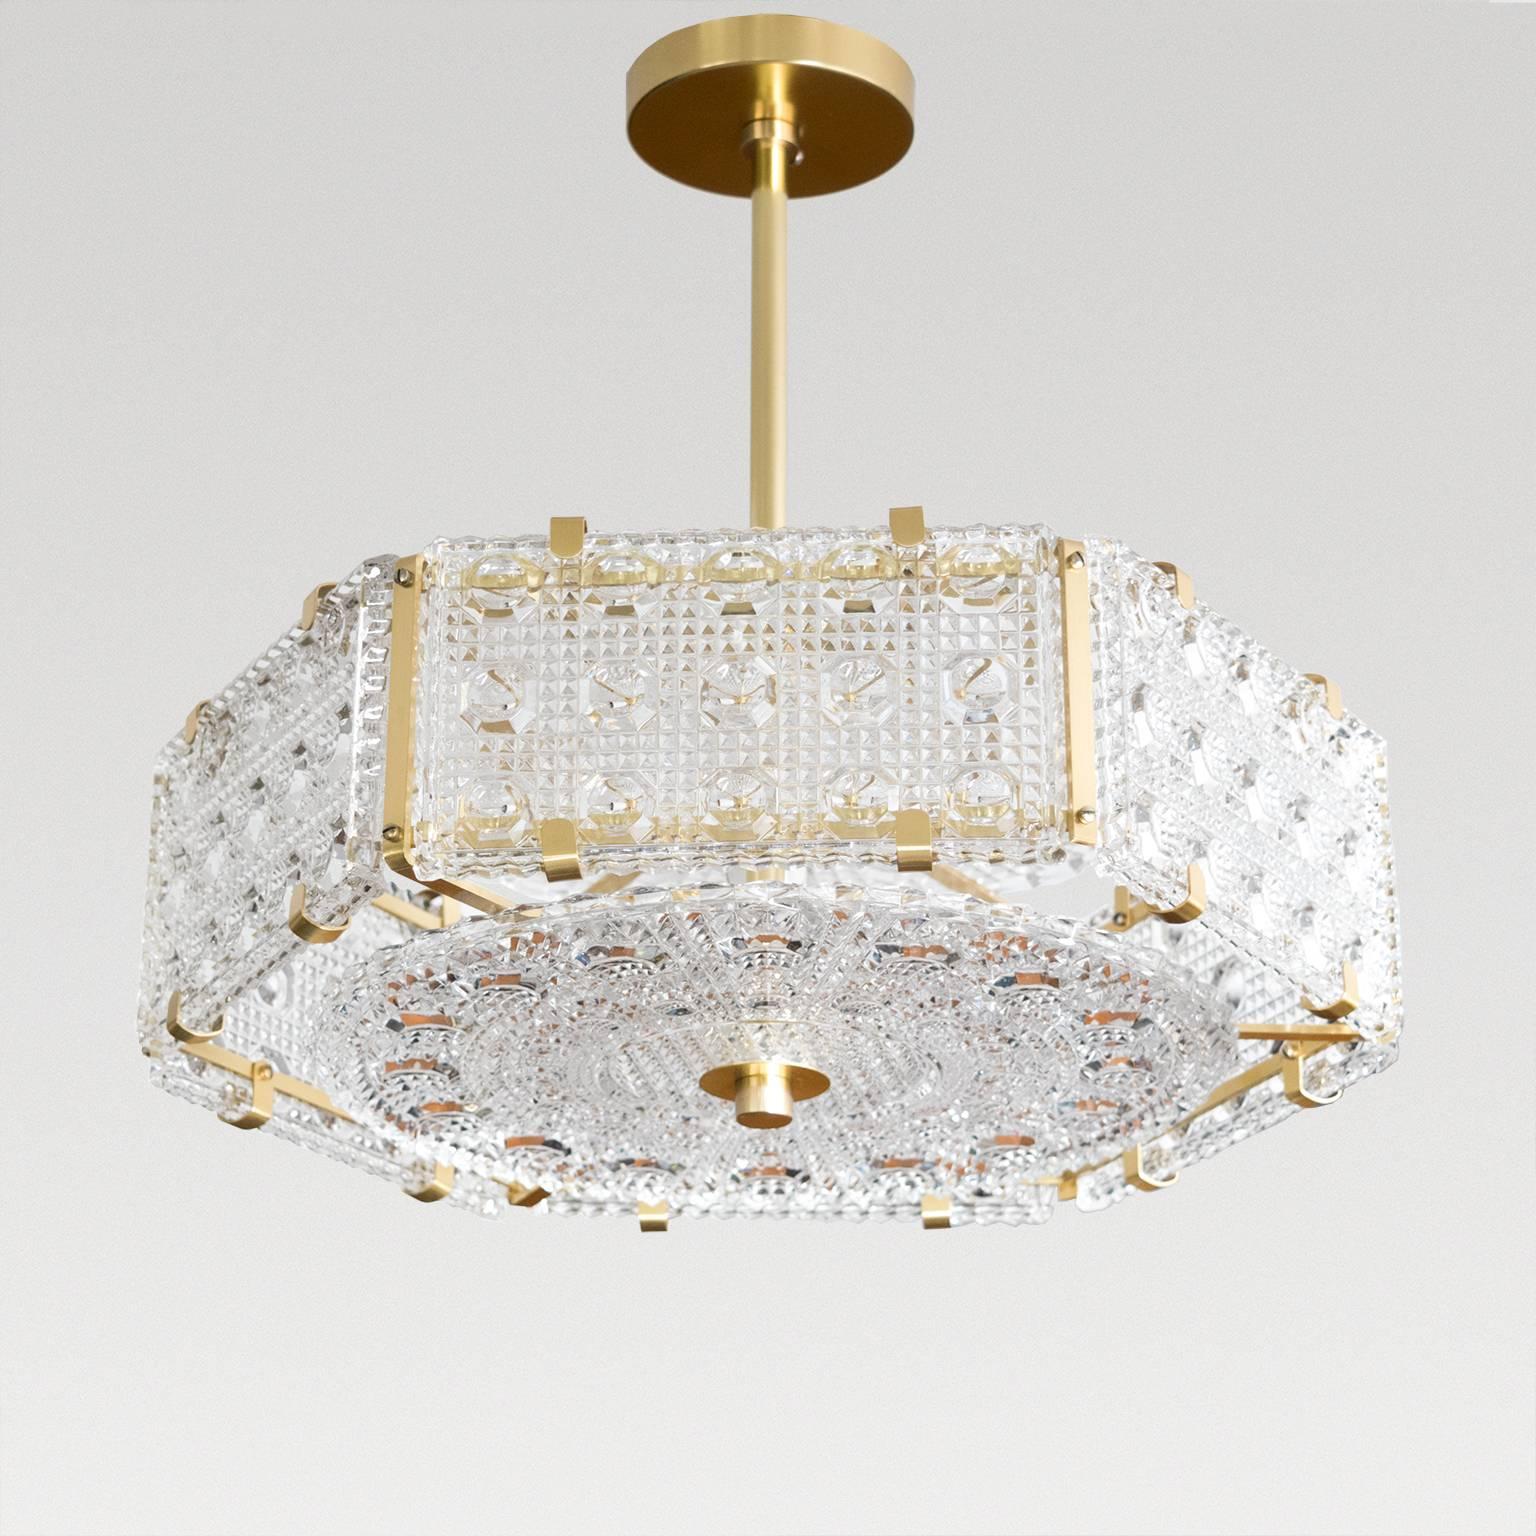 A Mid-Century Modern hexagonal shaped polished crystal pendant with rectangular sides and disc at top and bottom. The fixture has newly polished and lacquered hardware, frame, stem and canopy. Newly rewired for use in the USA with three candelabra